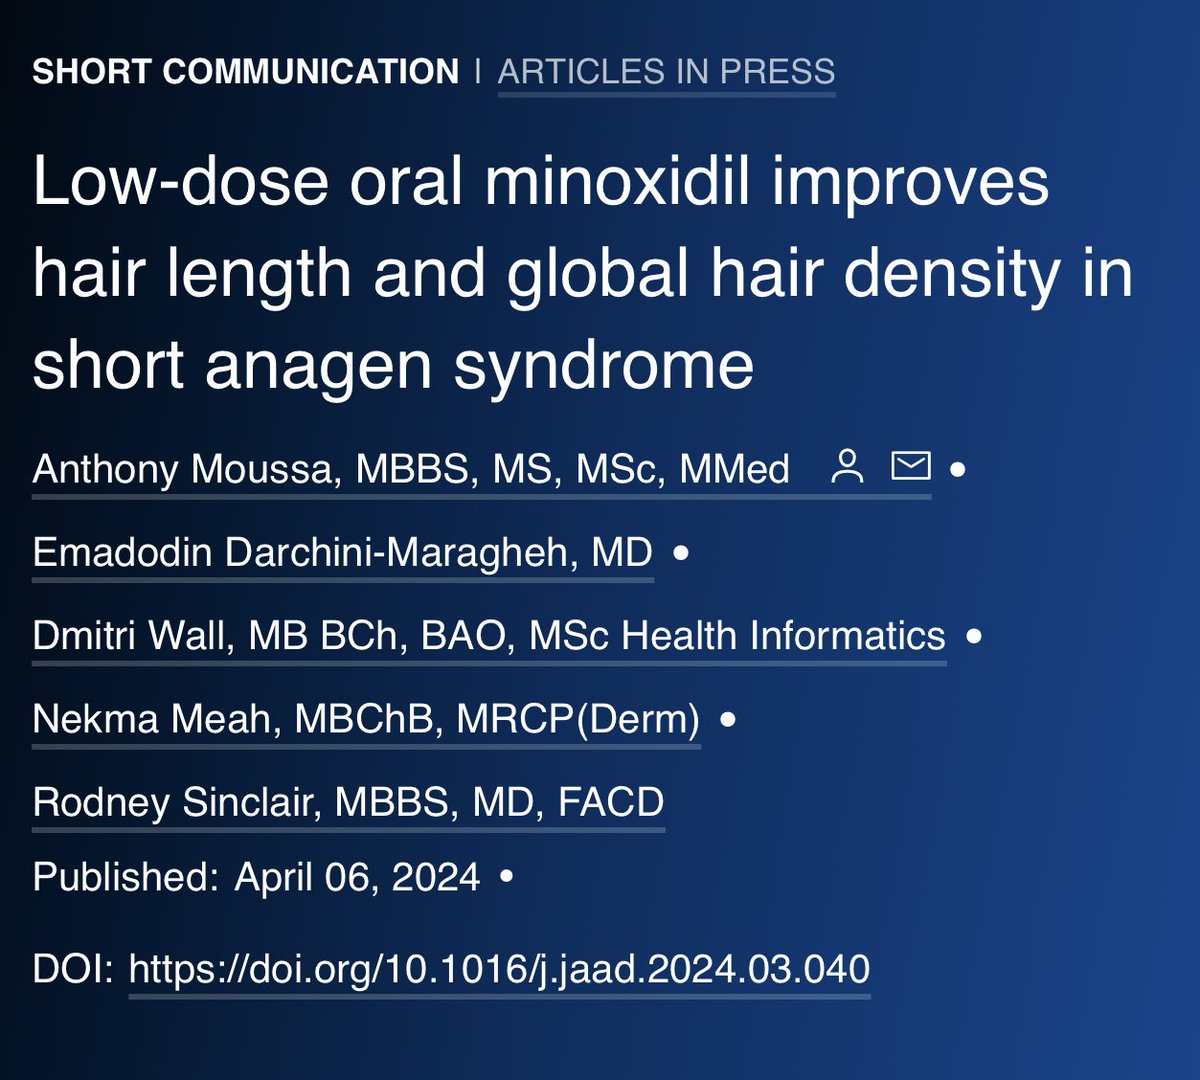 Well done to Anthony for increasing our understanding of low-dose oral #minoxidil #LDOM further; in this case, improving hair length and global hair density in short anagen syndrome @JAADjournals @SinclairDerm #hair jaad.org/article/S0190-…